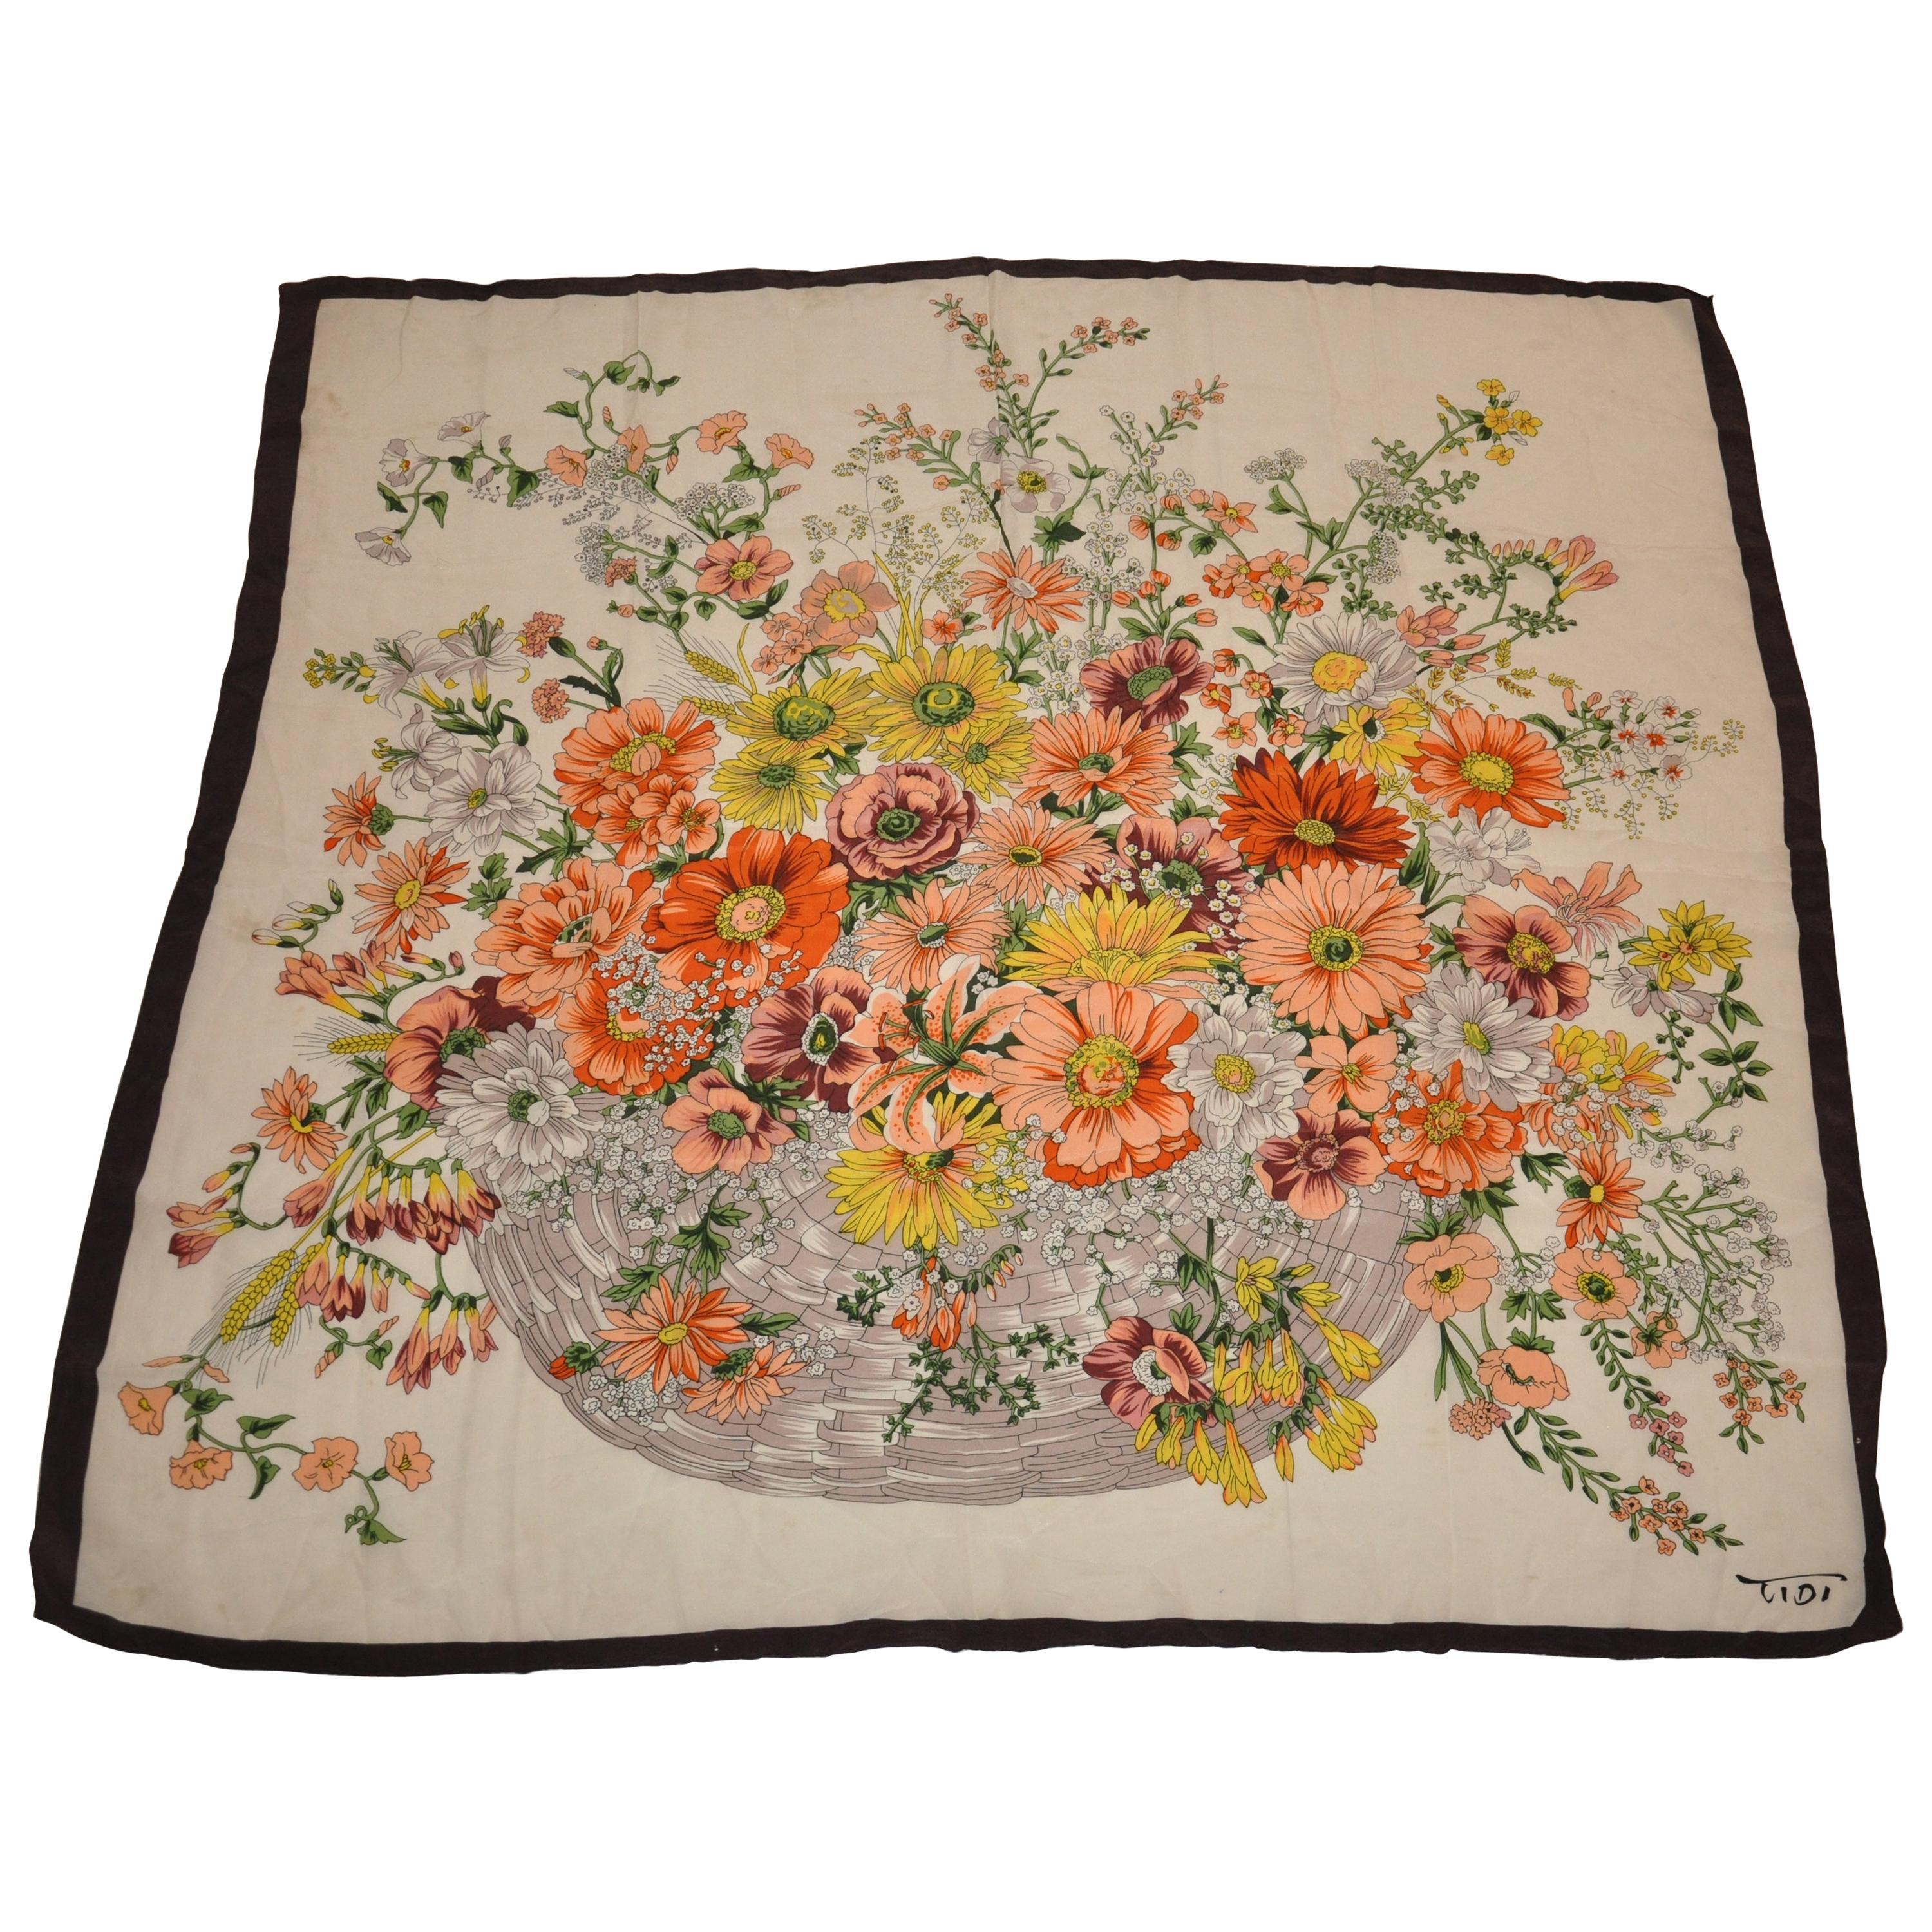 Huge Tibi Coco-Brown Borders Surrounding "Basket of Wild Florals" Silk Scarf For Sale